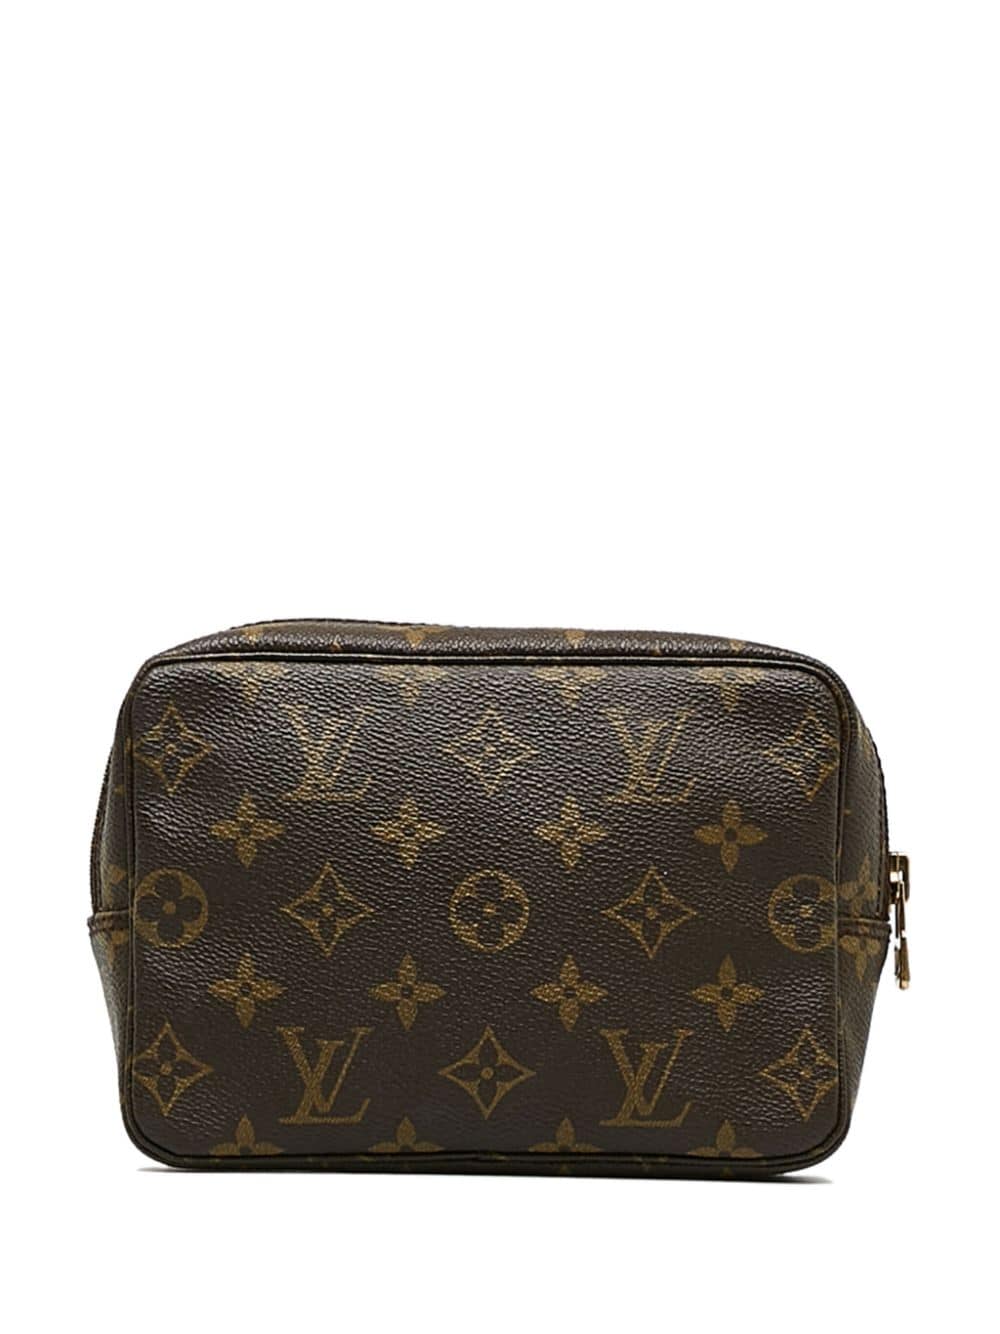 Pre-owned Louis Vuitton 1986 Trousse Toilette 18 Cosmetic Pouch In Brown